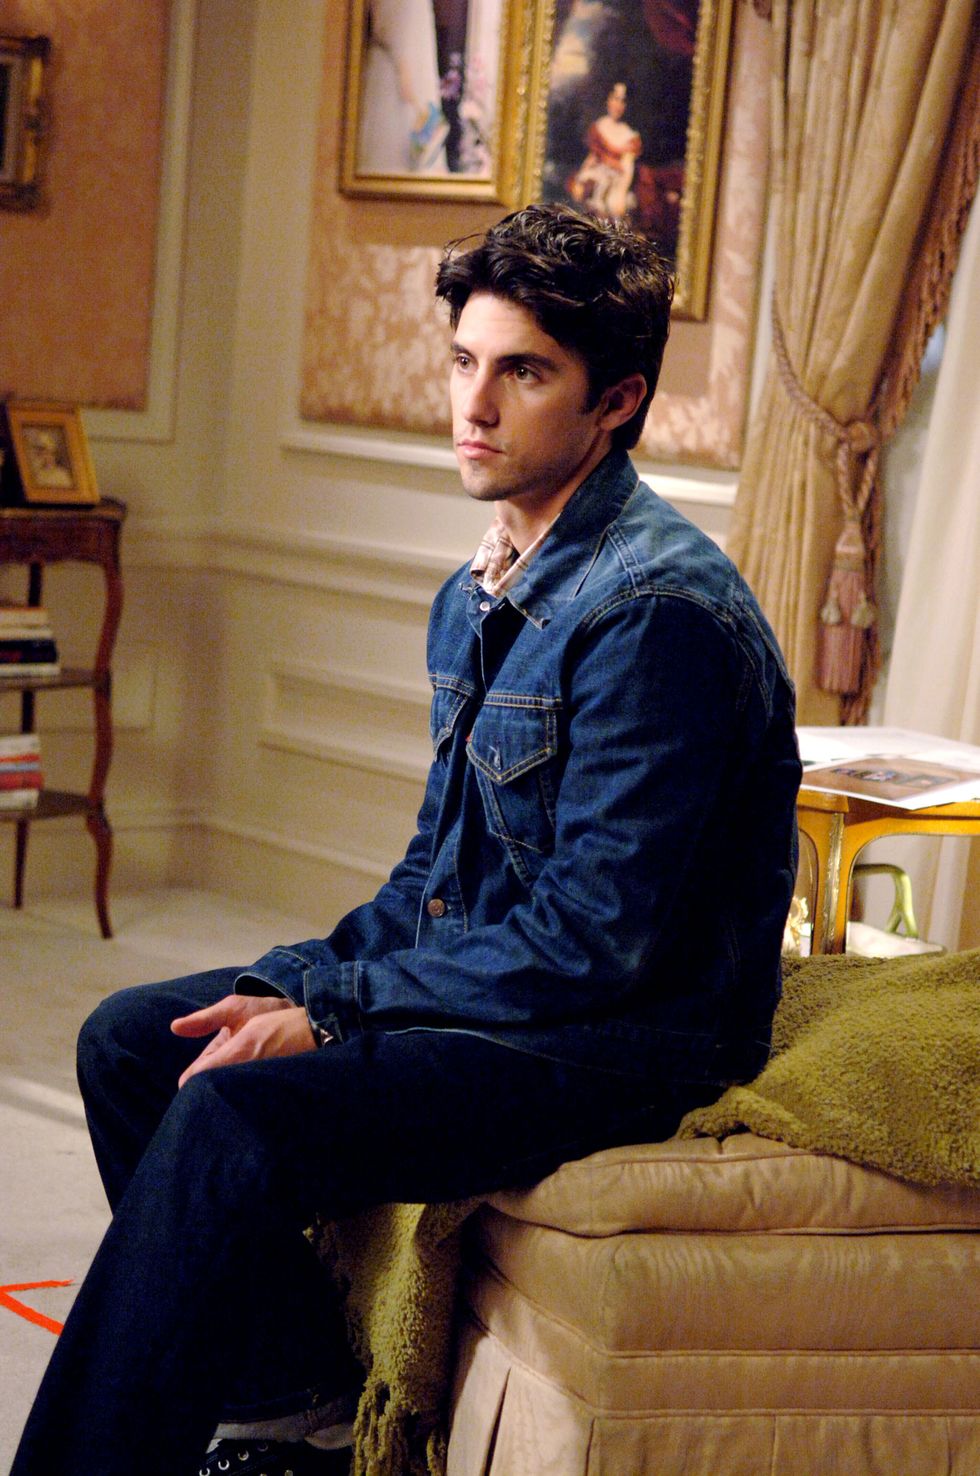 gilmore girls, milo ventimiglia, 'let me hear your balailakas ringing out' season 6, aired november 8, 2005, 2000 2007, photo© warner broscourtesy everett collection